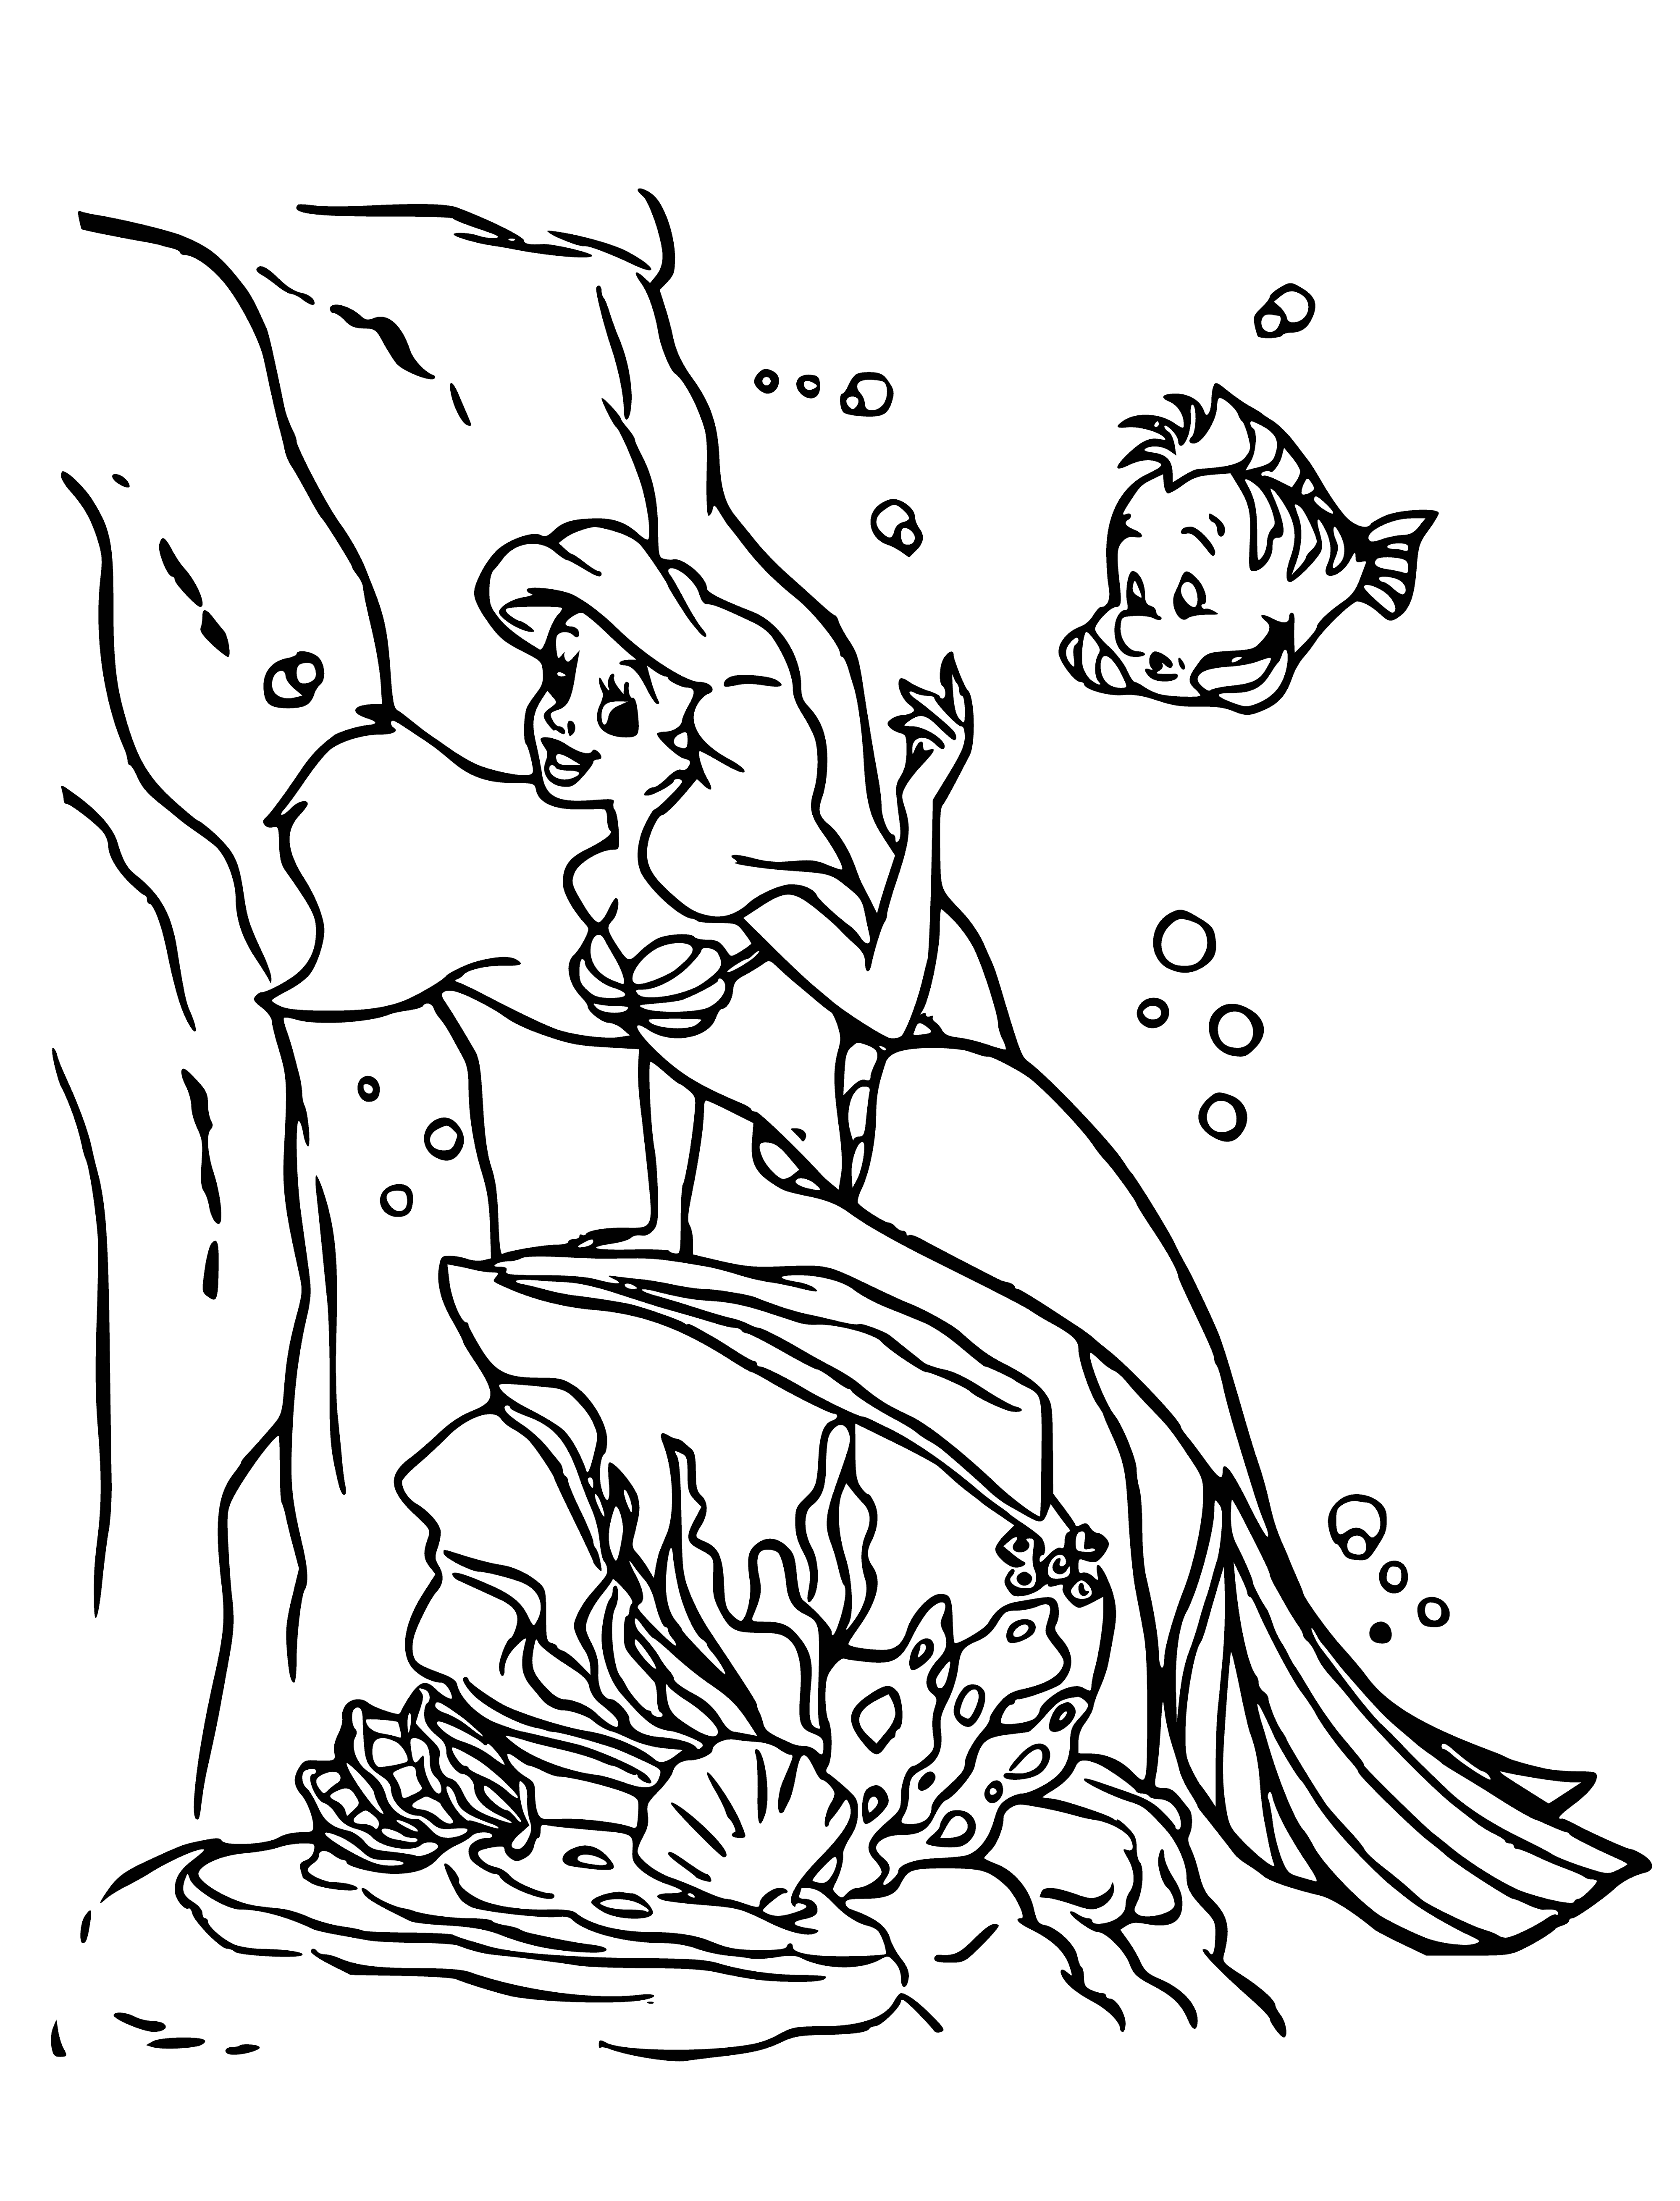 coloring page: Young mermaid wearing a green & purple outfit, blue fish tail and standing on a rock with a yellow belt. Nearby, swimming Flounder, a small blue & yellow fish. #Disney #LittleMermaid